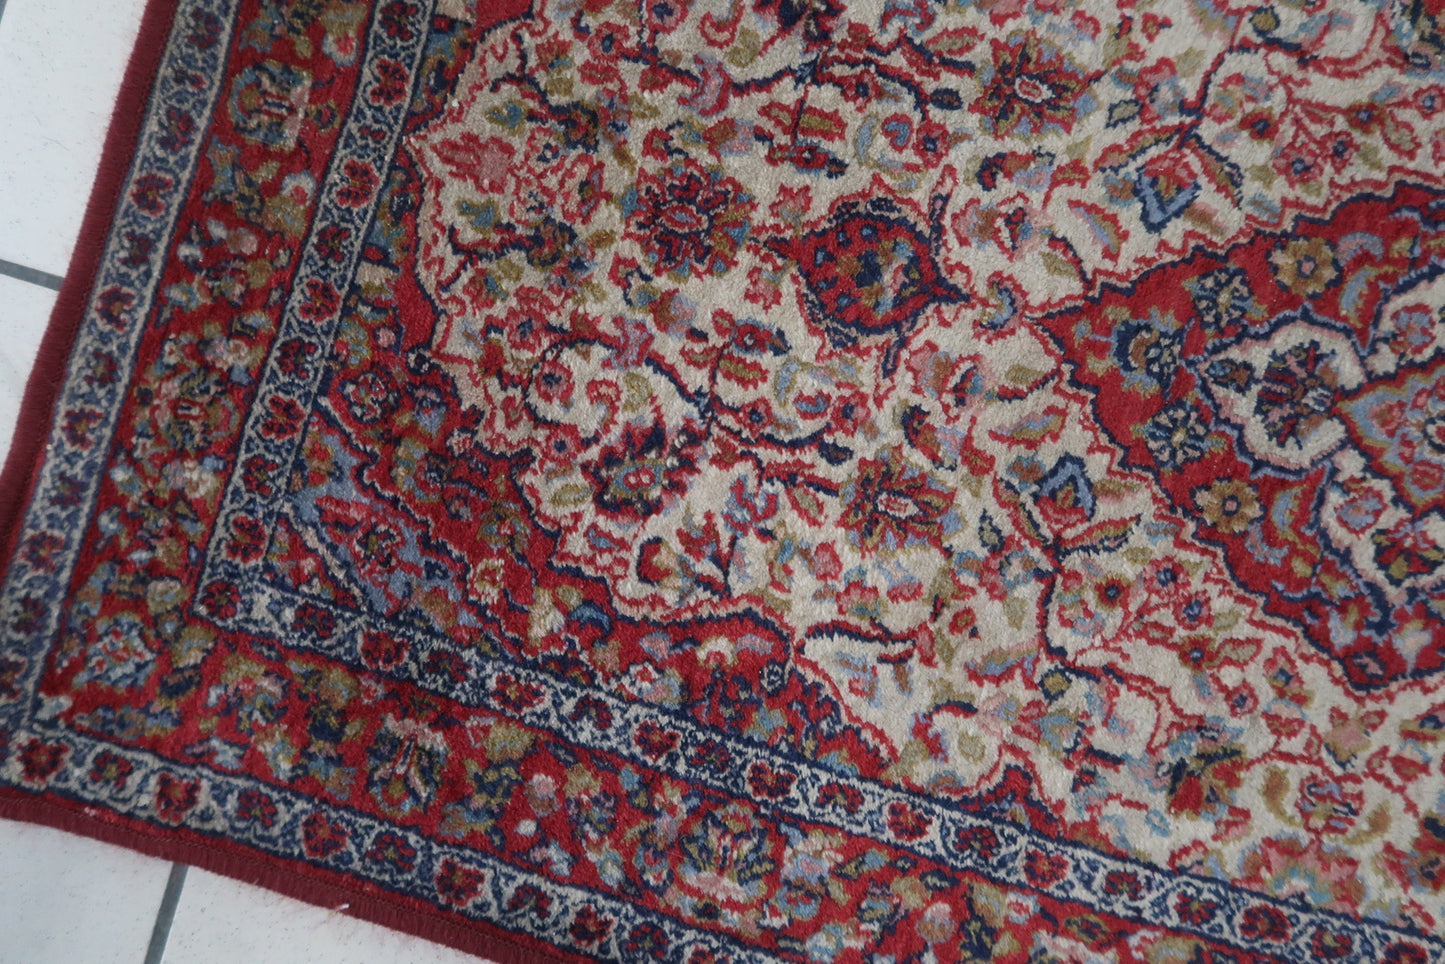 Detailed view of the wool fibers, highlighting the rug's durability and texture